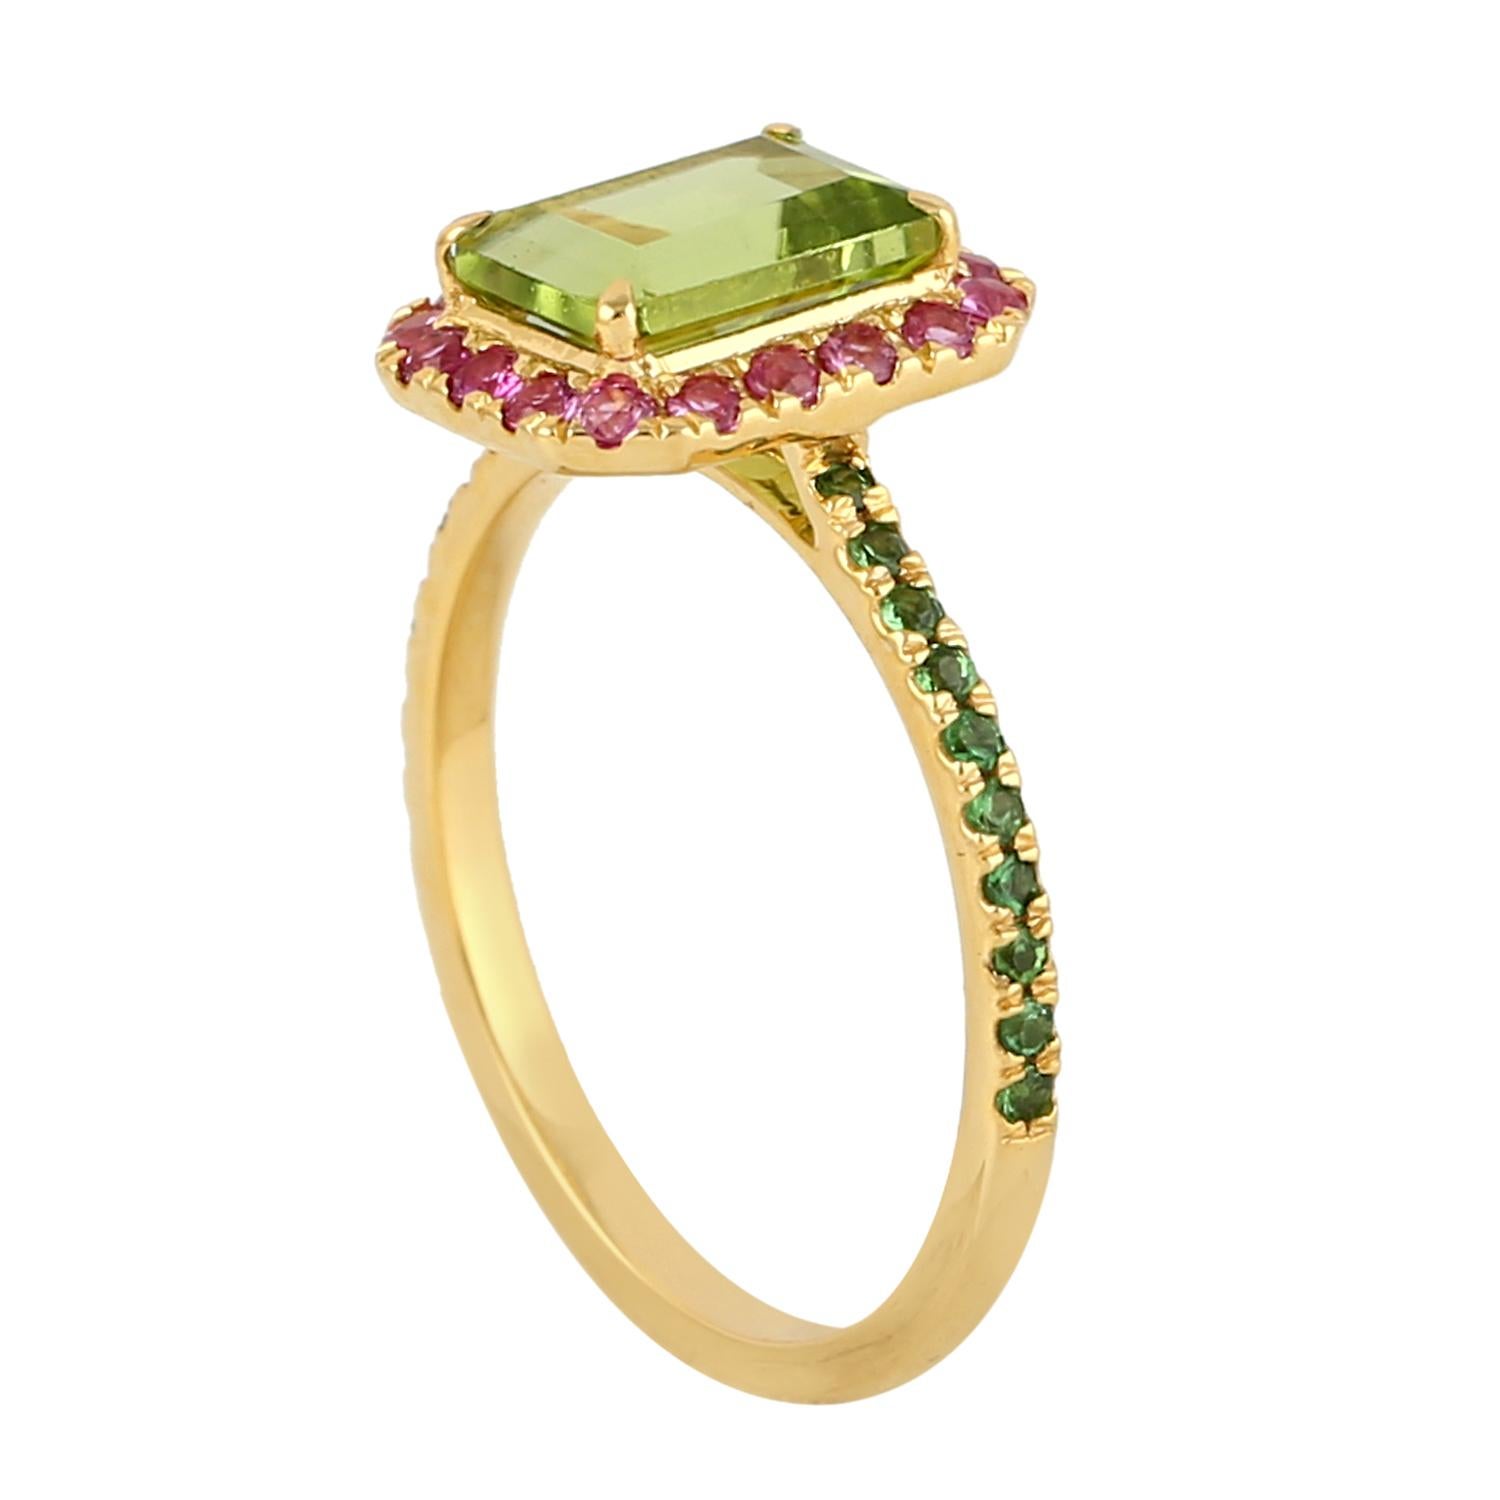 This ring has been meticulously crafted from 14-karat gold.  It is hand set with 1.89 carats peridot,.38 carats sapphire & .22 carats tsavorite. 

The ring is a size 7 and may be resized to larger or smaller upon request. 
FOLLOW  MEGHNA JEWELS